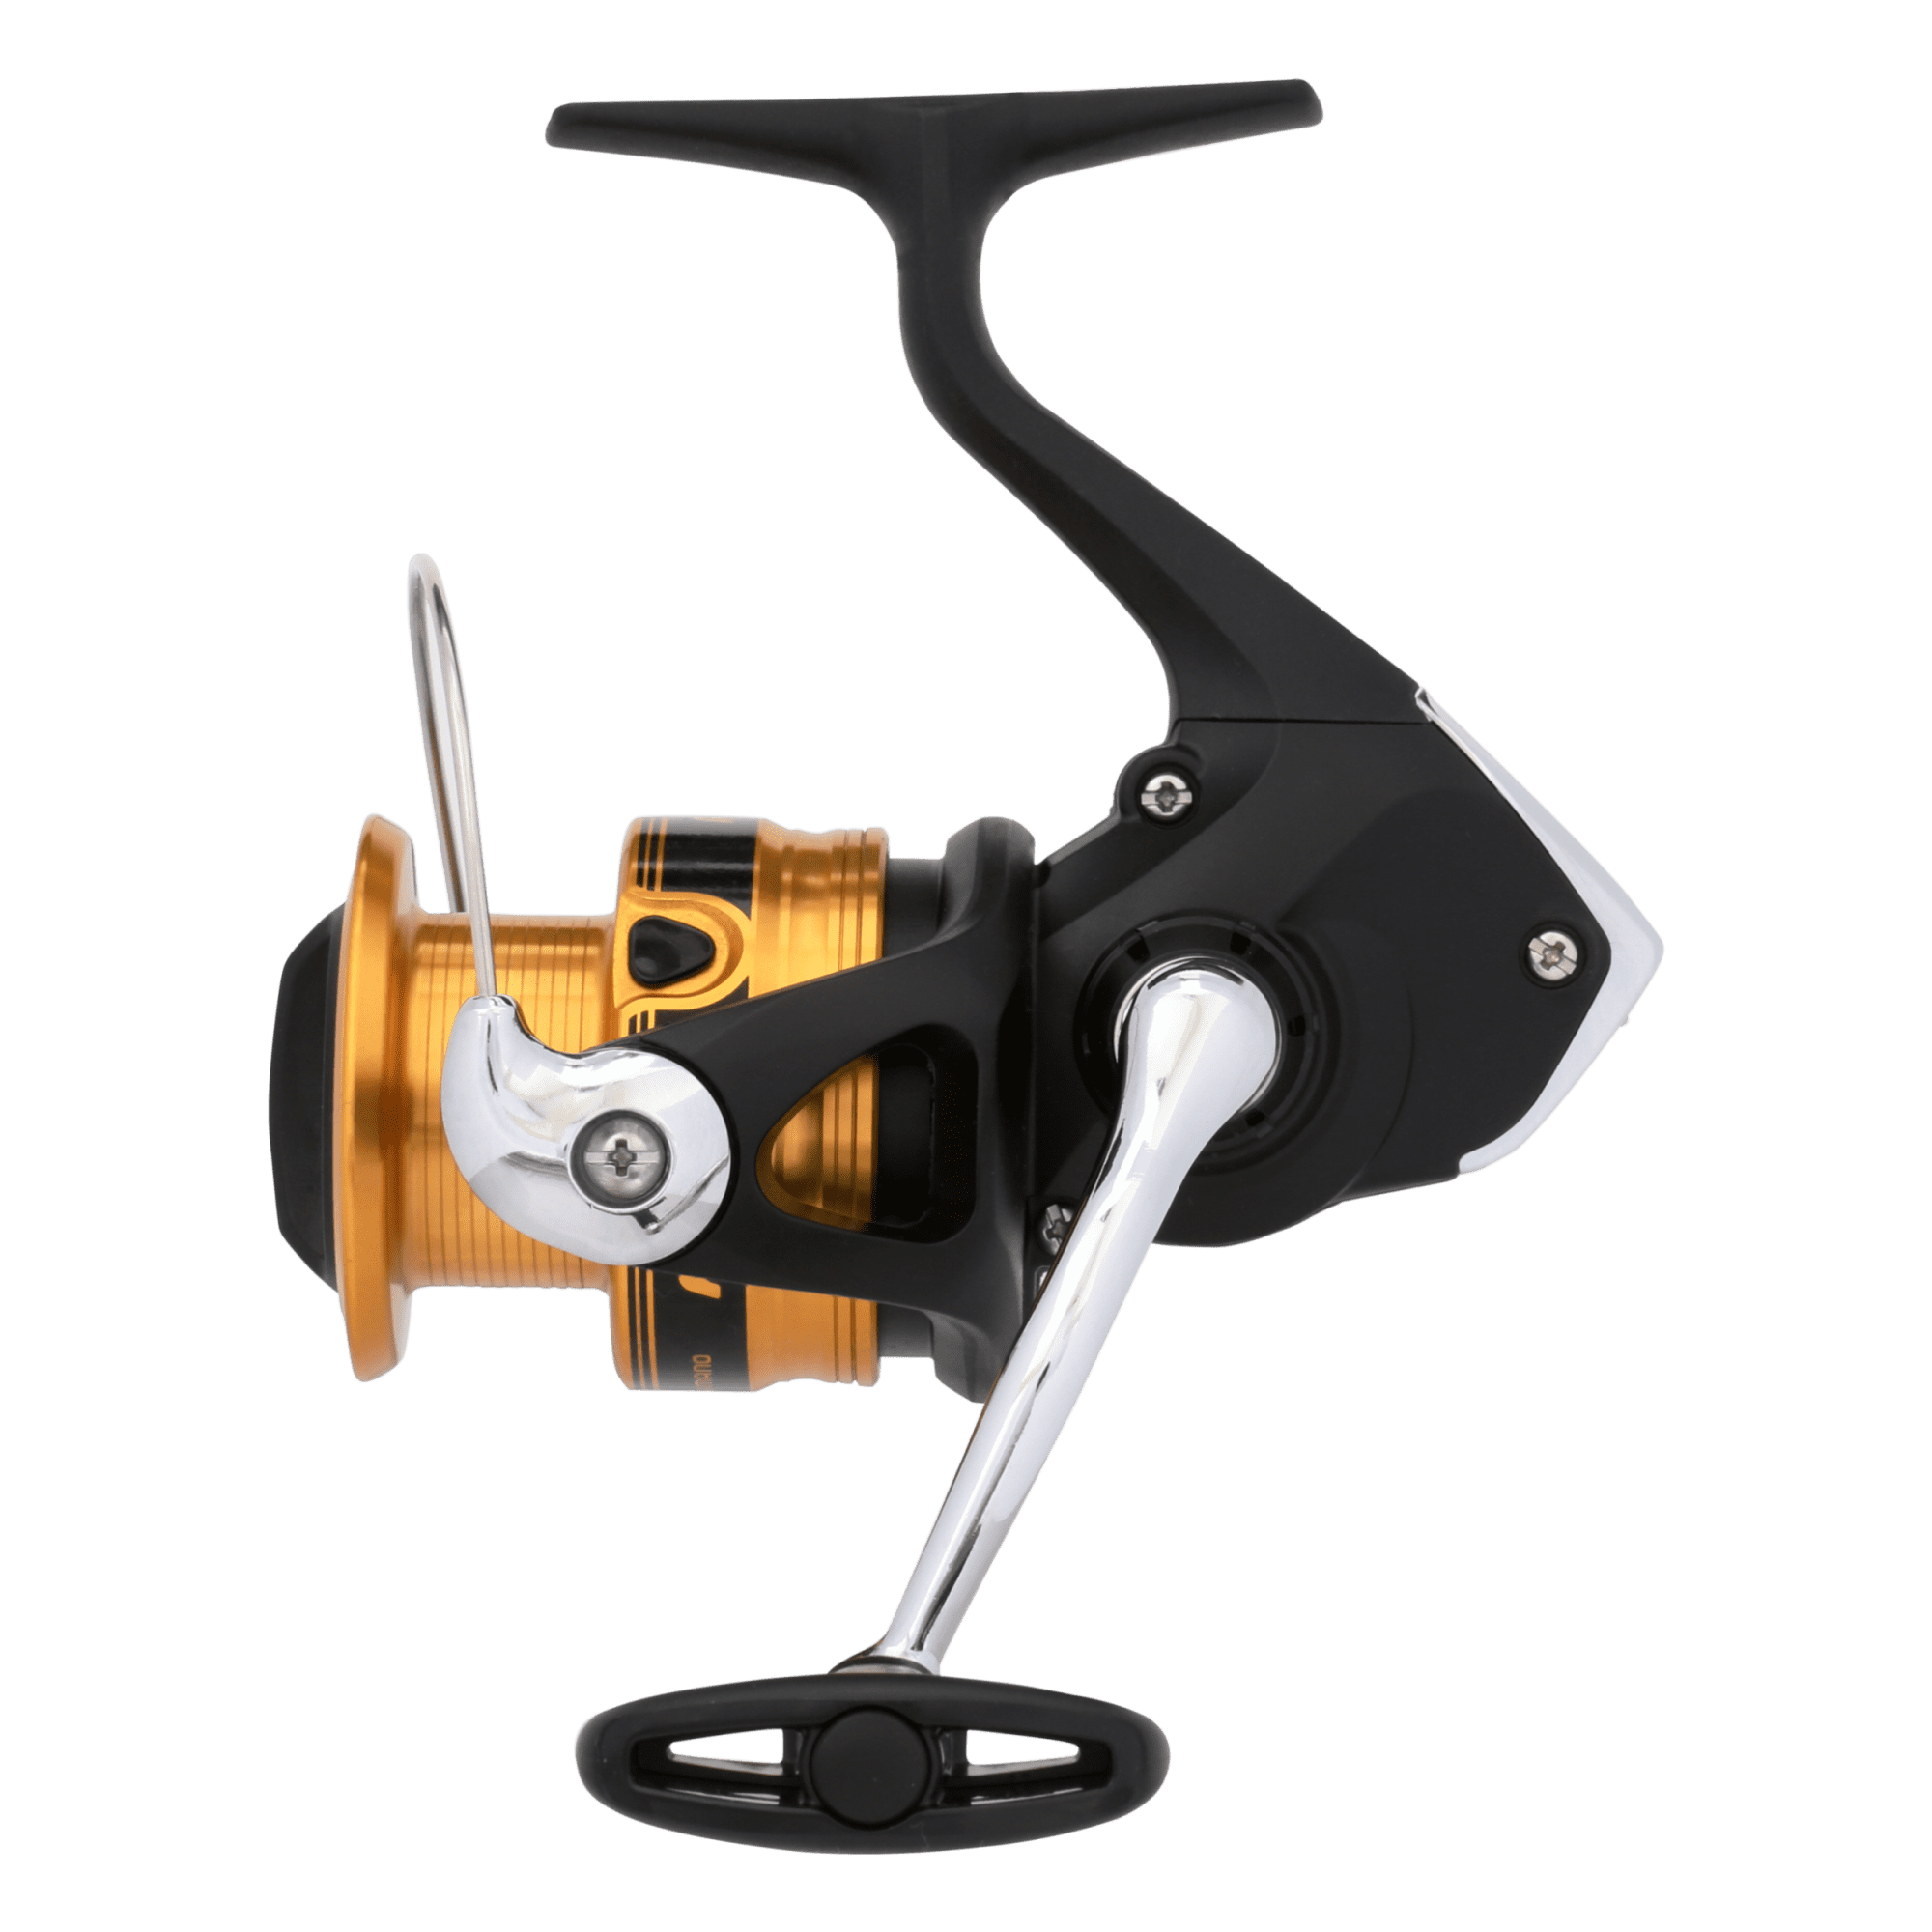 electric reel shimano, electric reel shimano Suppliers and Manufacturers at